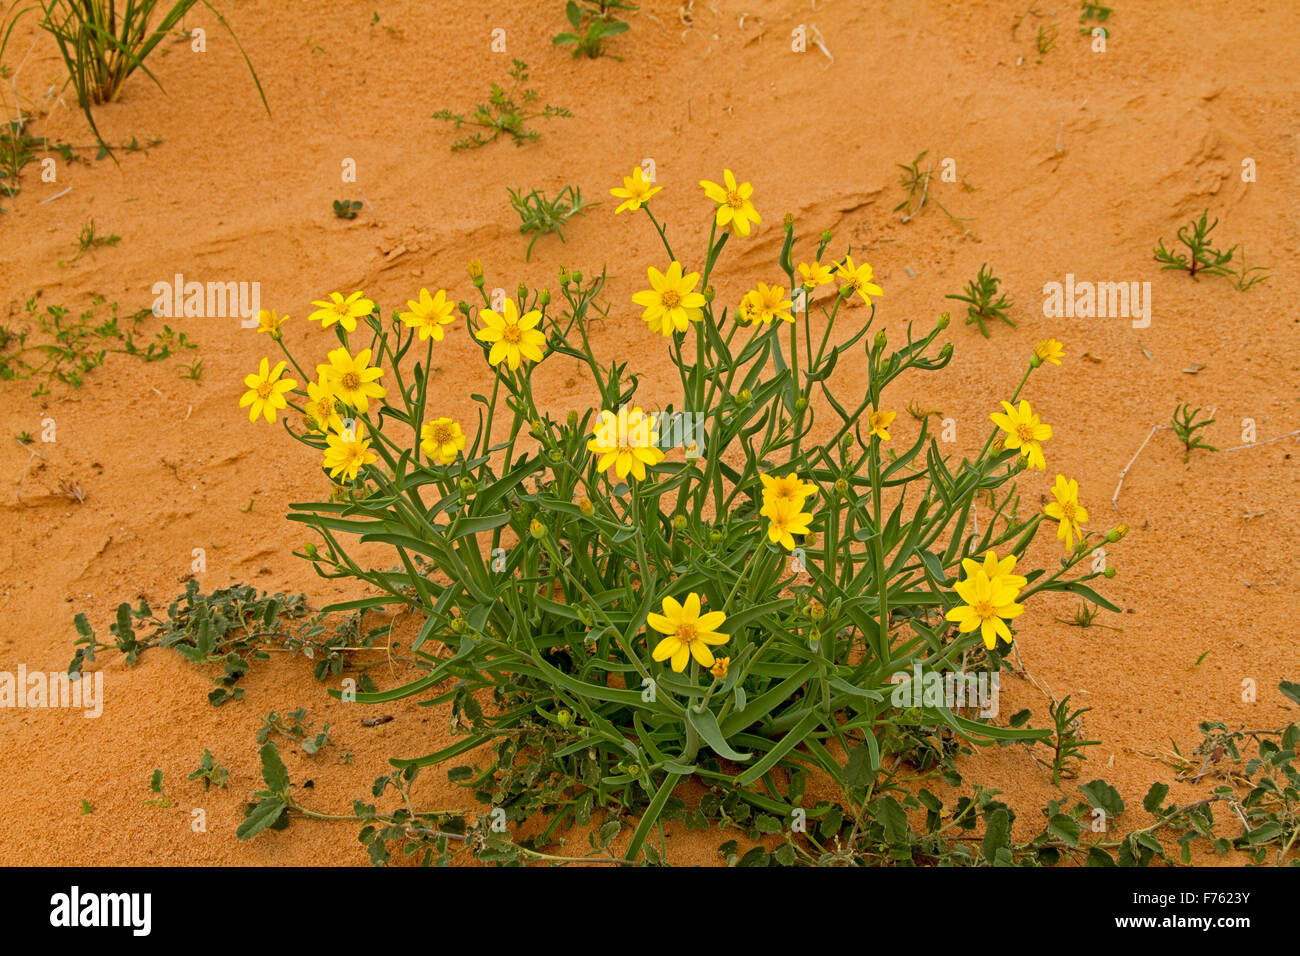 Senecio gregoril vivid yellow wildflowers & emerald foliage of annual Yellowtop /  fleshy groundsel growing in red outback soil in Australia Stock Photo